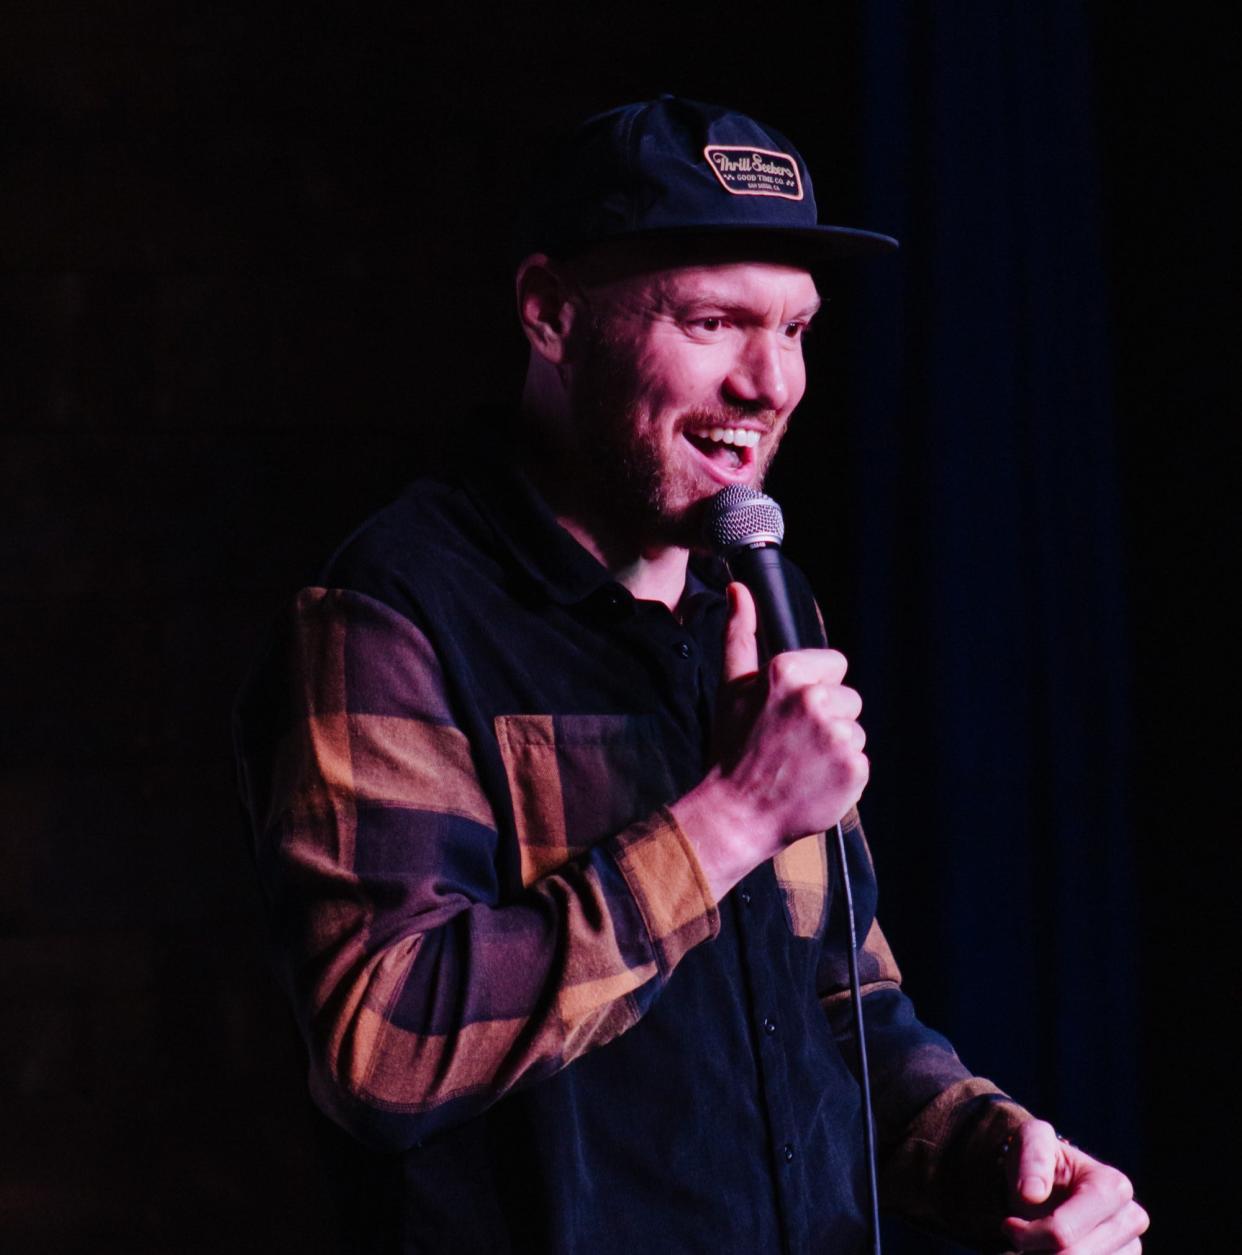 Kickapoo and Drury graduate Kenny DeForest died Dec. 13 after an e-bike accident in New York City. The stand-up comic was an organ donor and has already helped seven people.